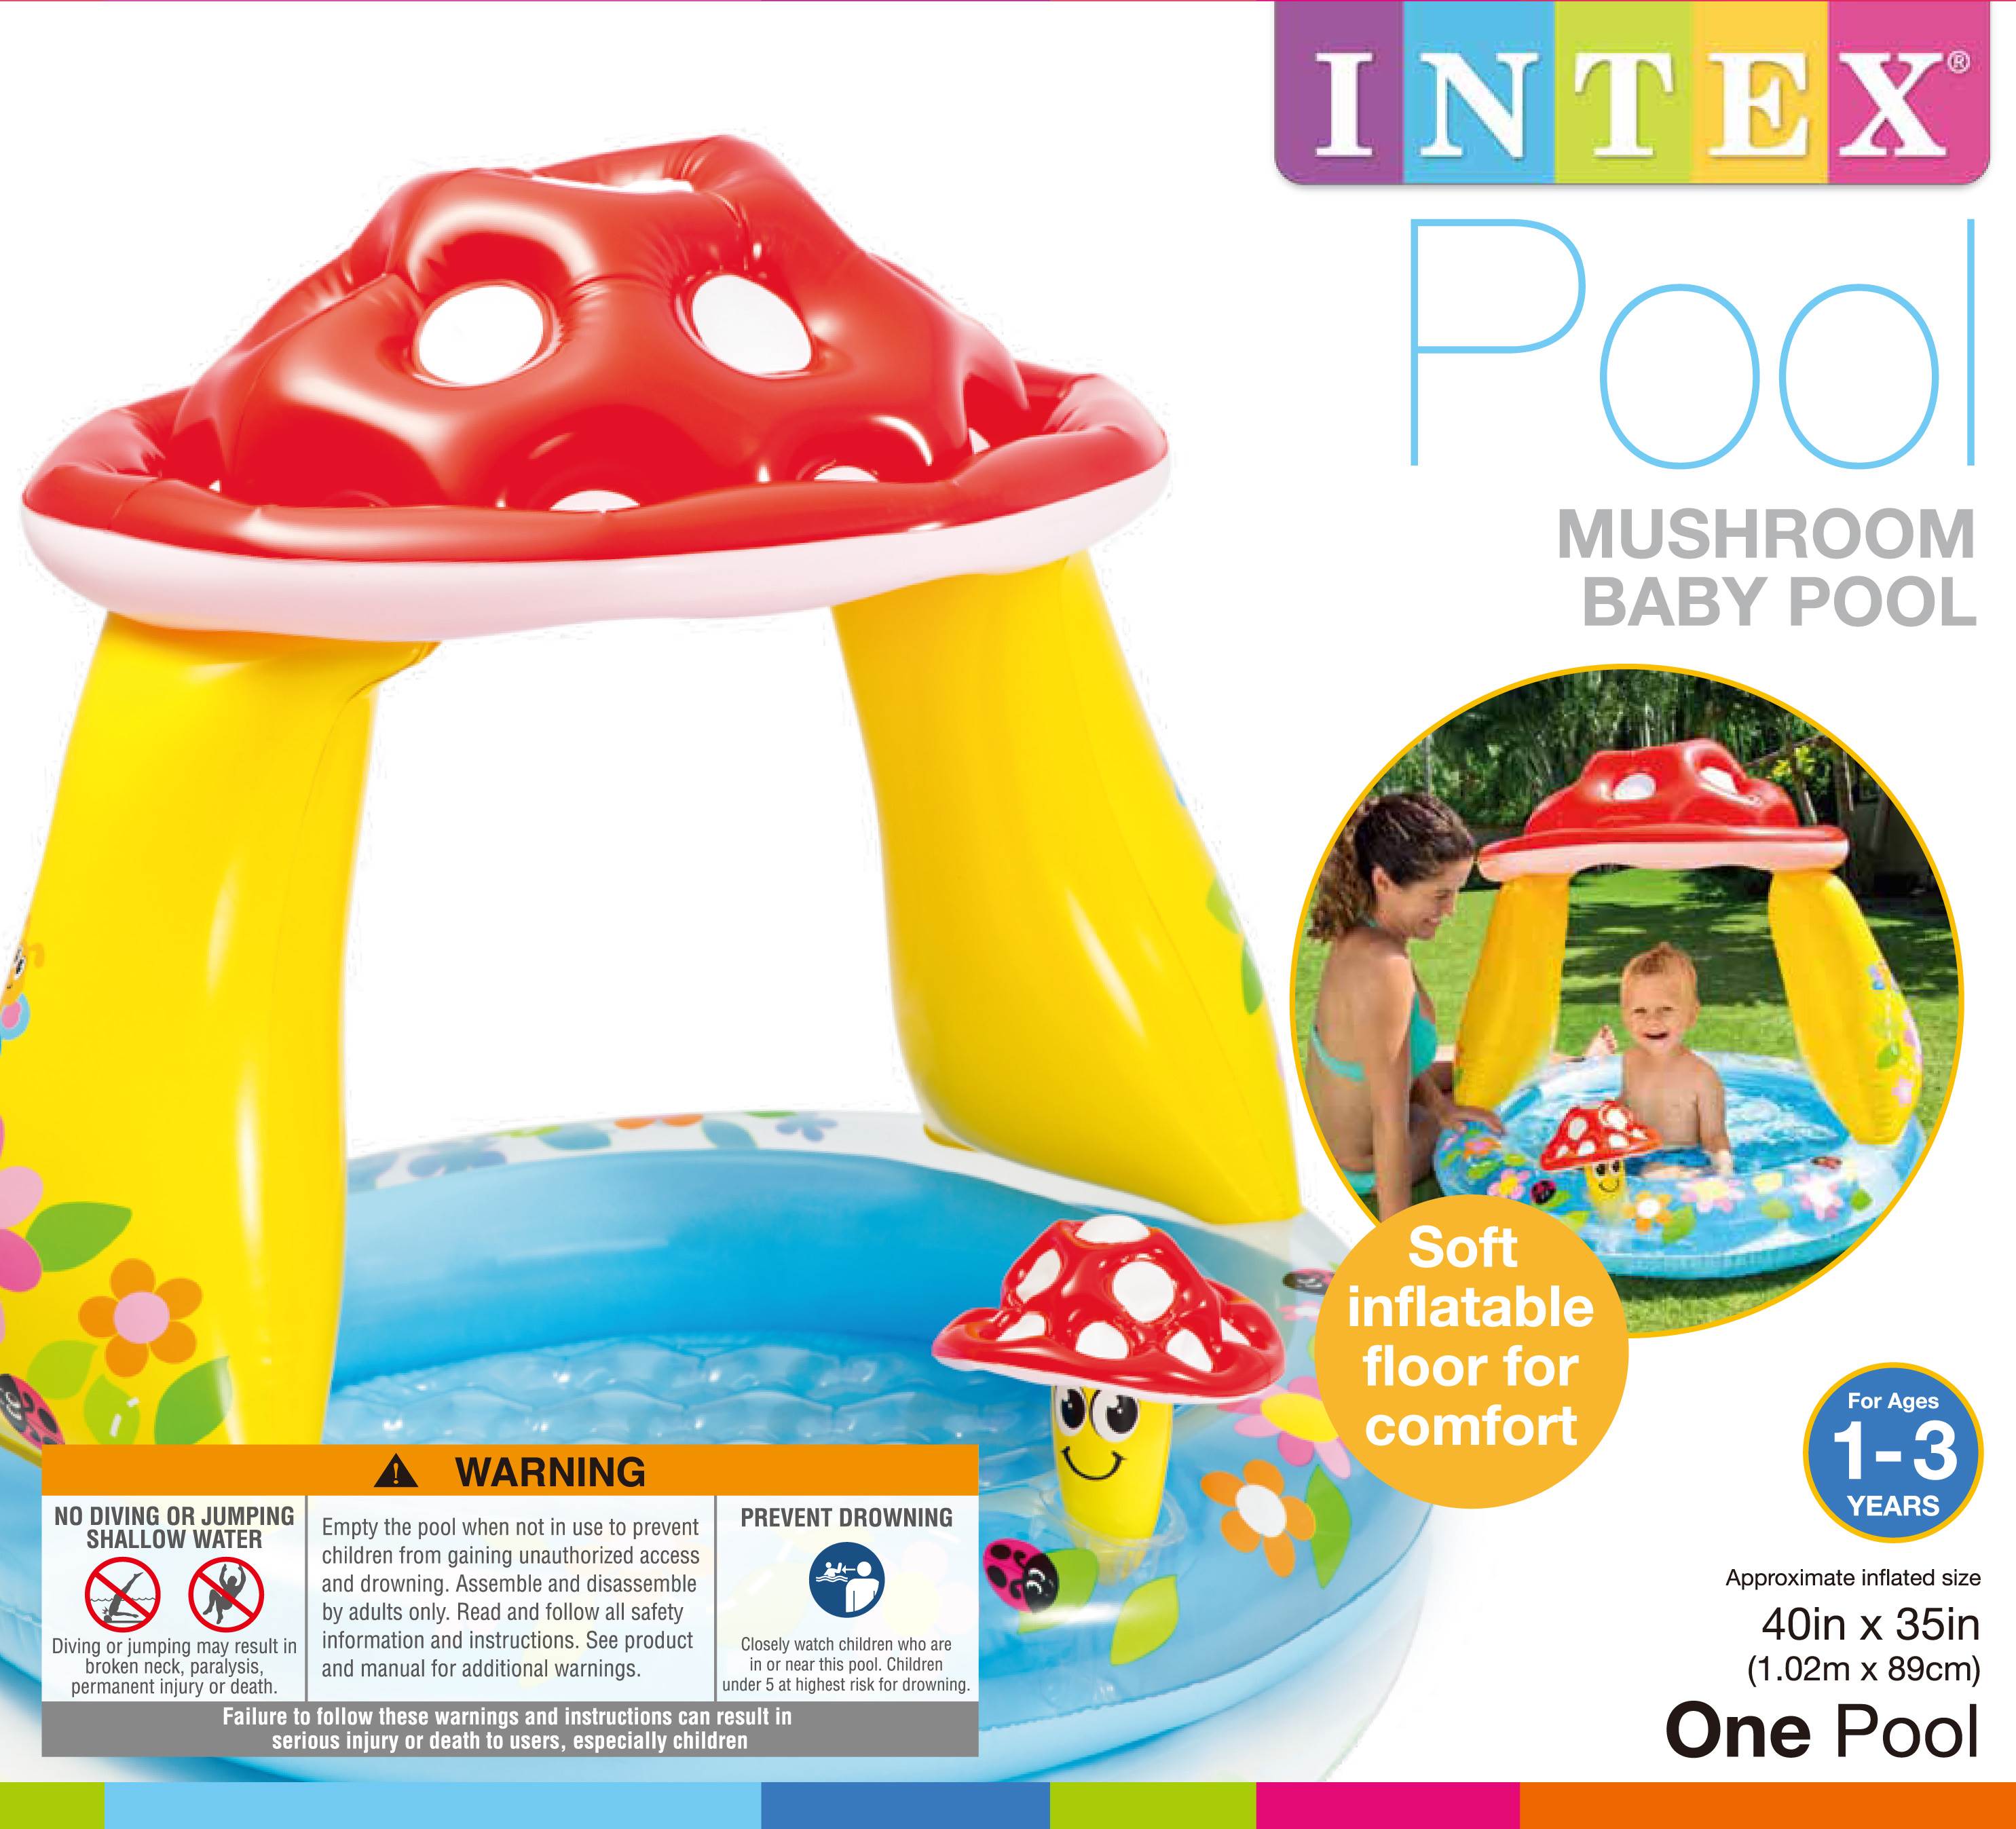 Intex Inflatable Mushroom Water Play Center Kiddie Baby Swimming Pool Ages 1-3 - image 4 of 5